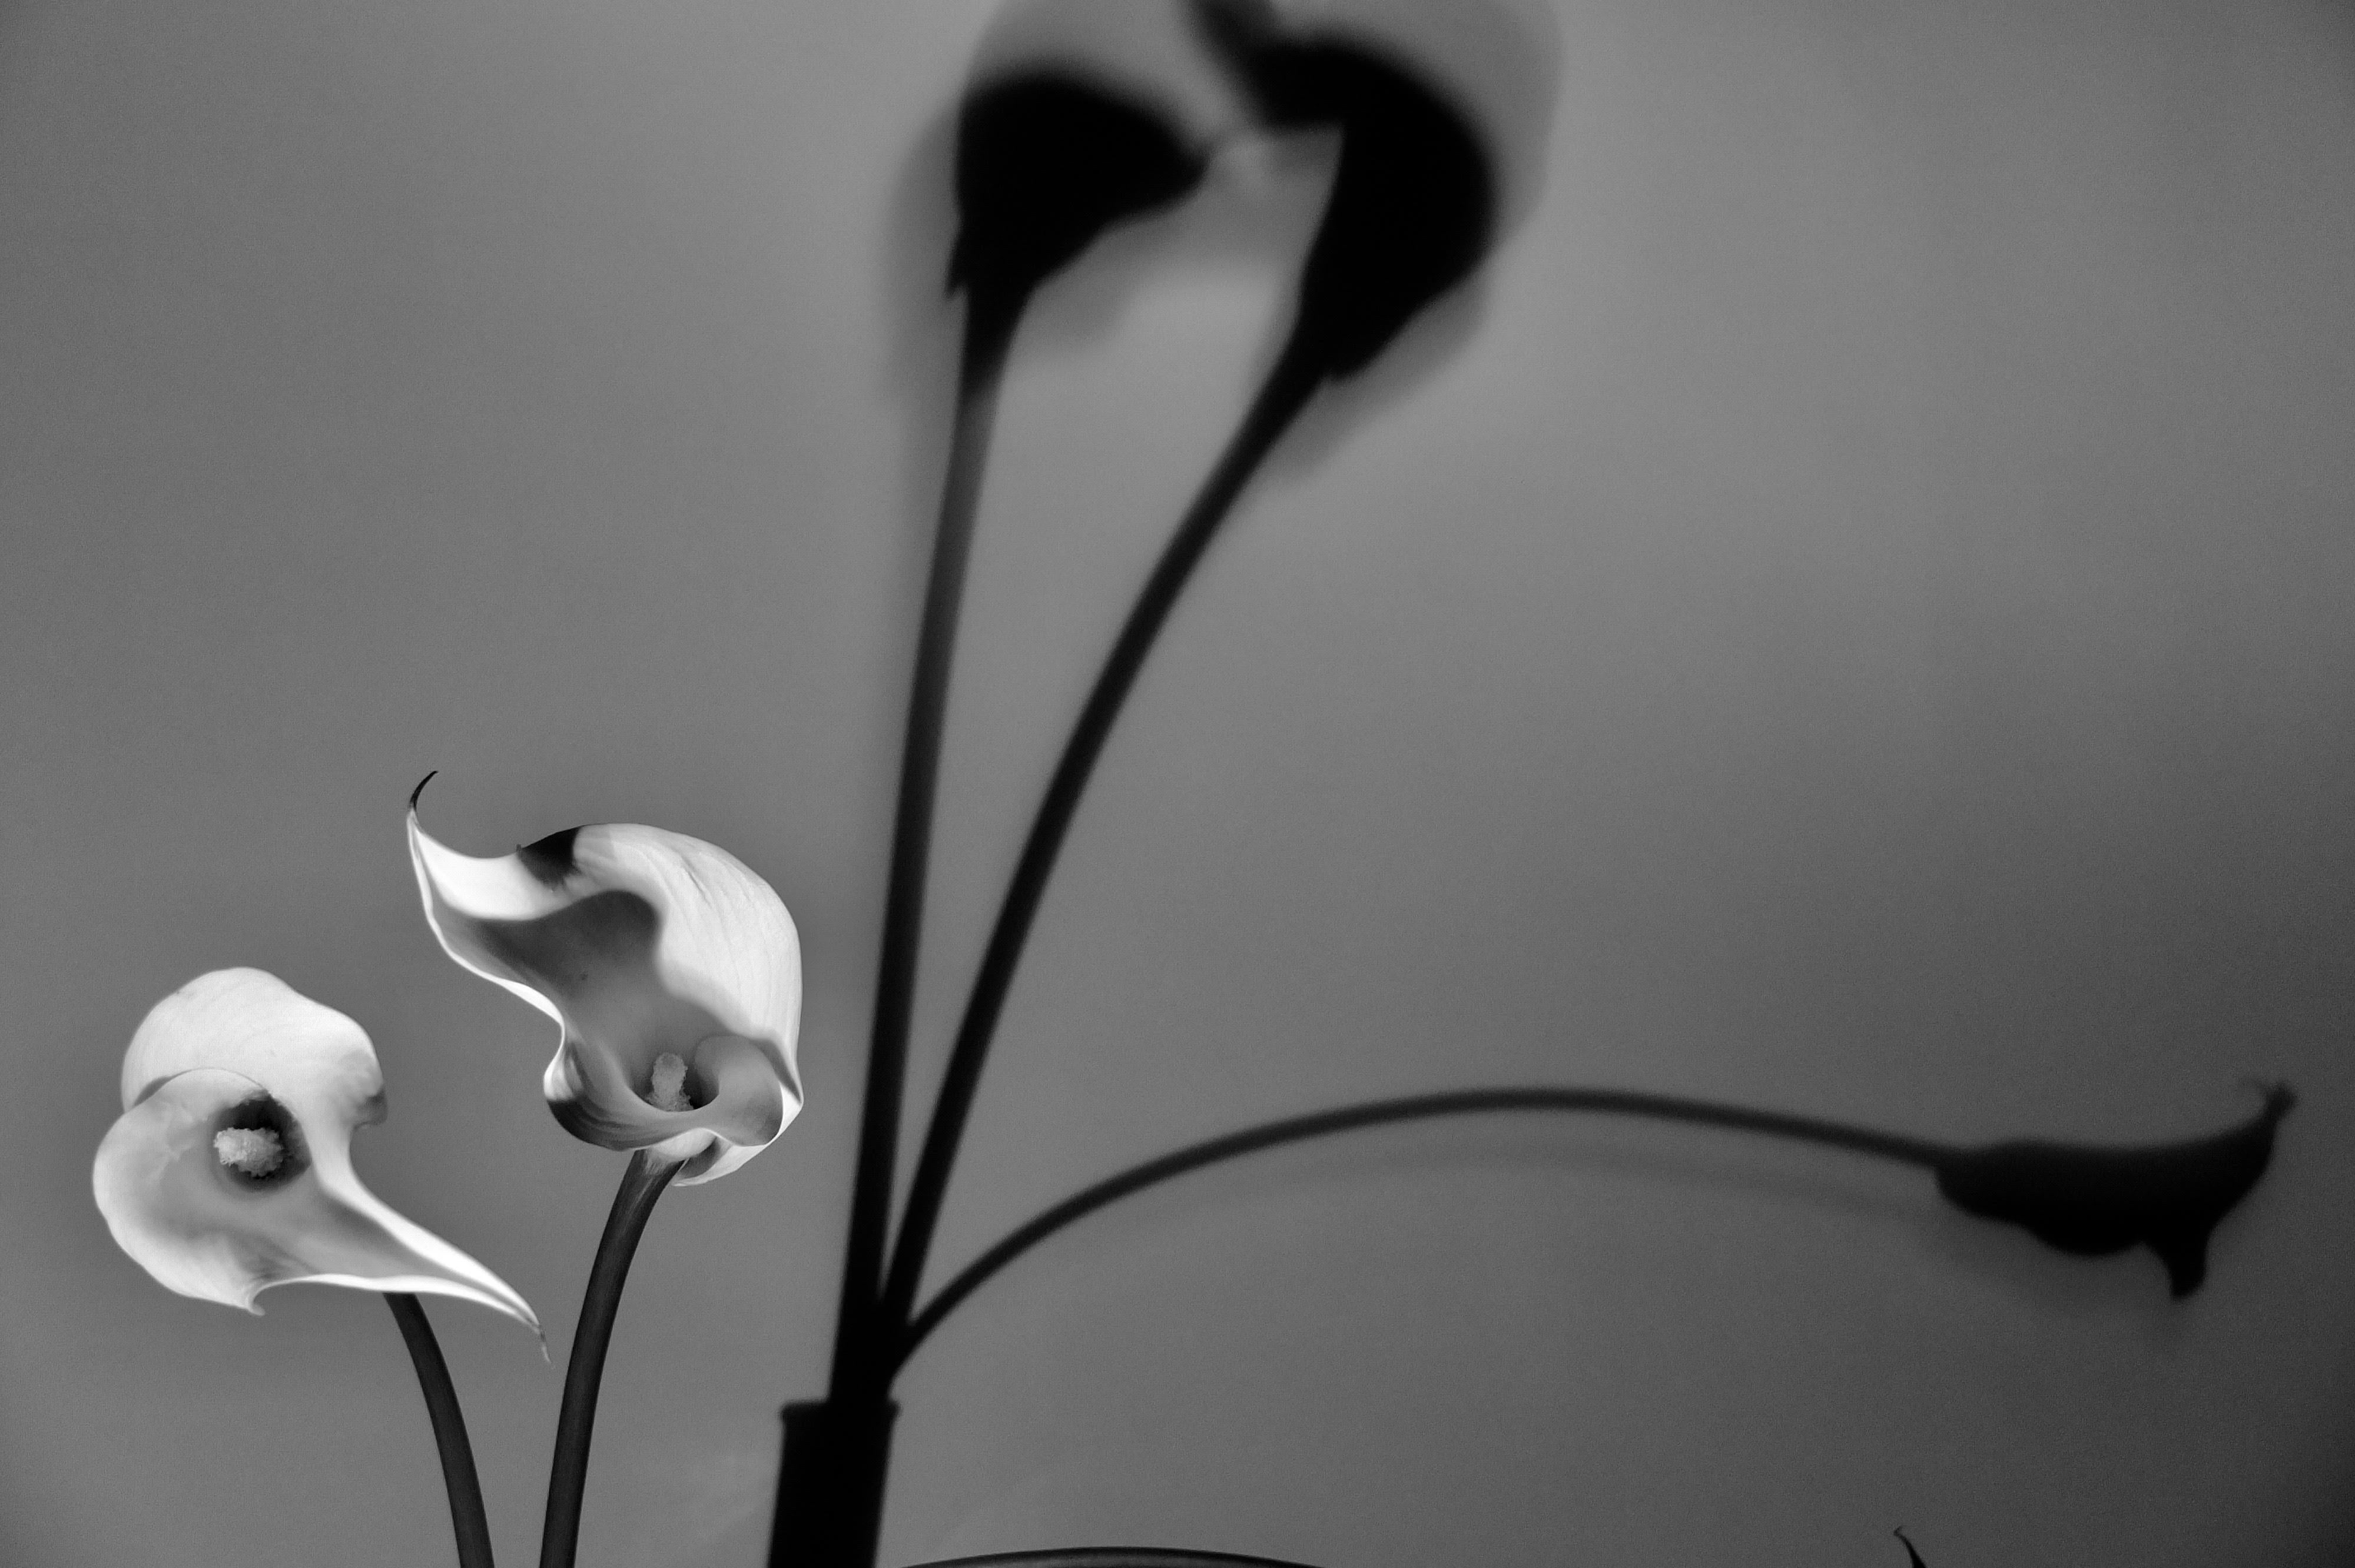 Beautiful black and white photograph of lilies by NY based photographer Christophe von Hohenberg. Von Hohenberg’s “Flower Series: Shadows of the Soul” was inspired by Oscar Wilde’s … “What men call the shadow of the body is not the shadow of the